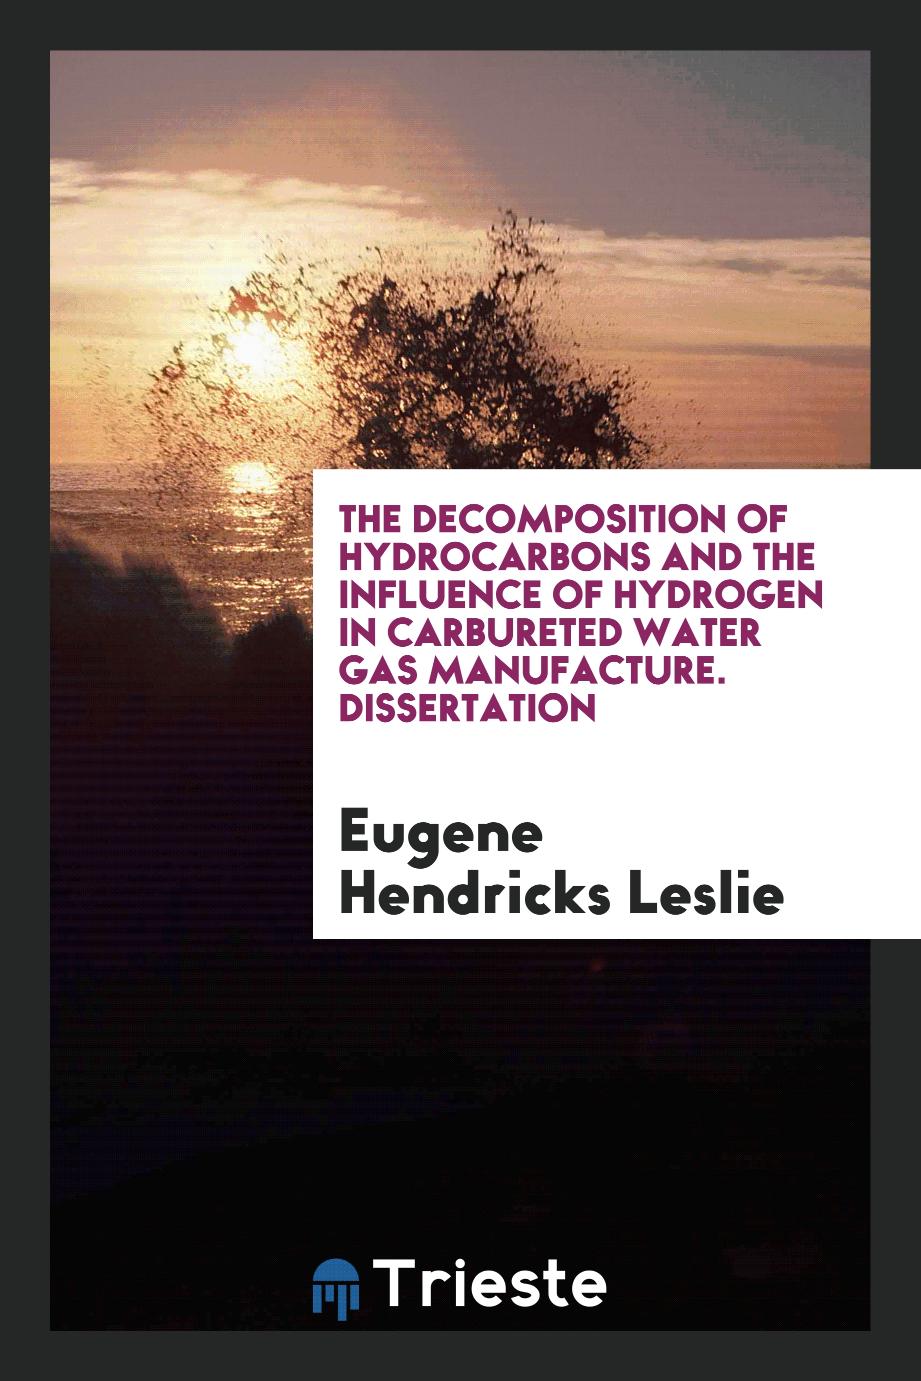 The Decomposition of Hydrocarbons and the Influence of Hydrogen in Carbureted Water Gas Manufacture. Dissertation